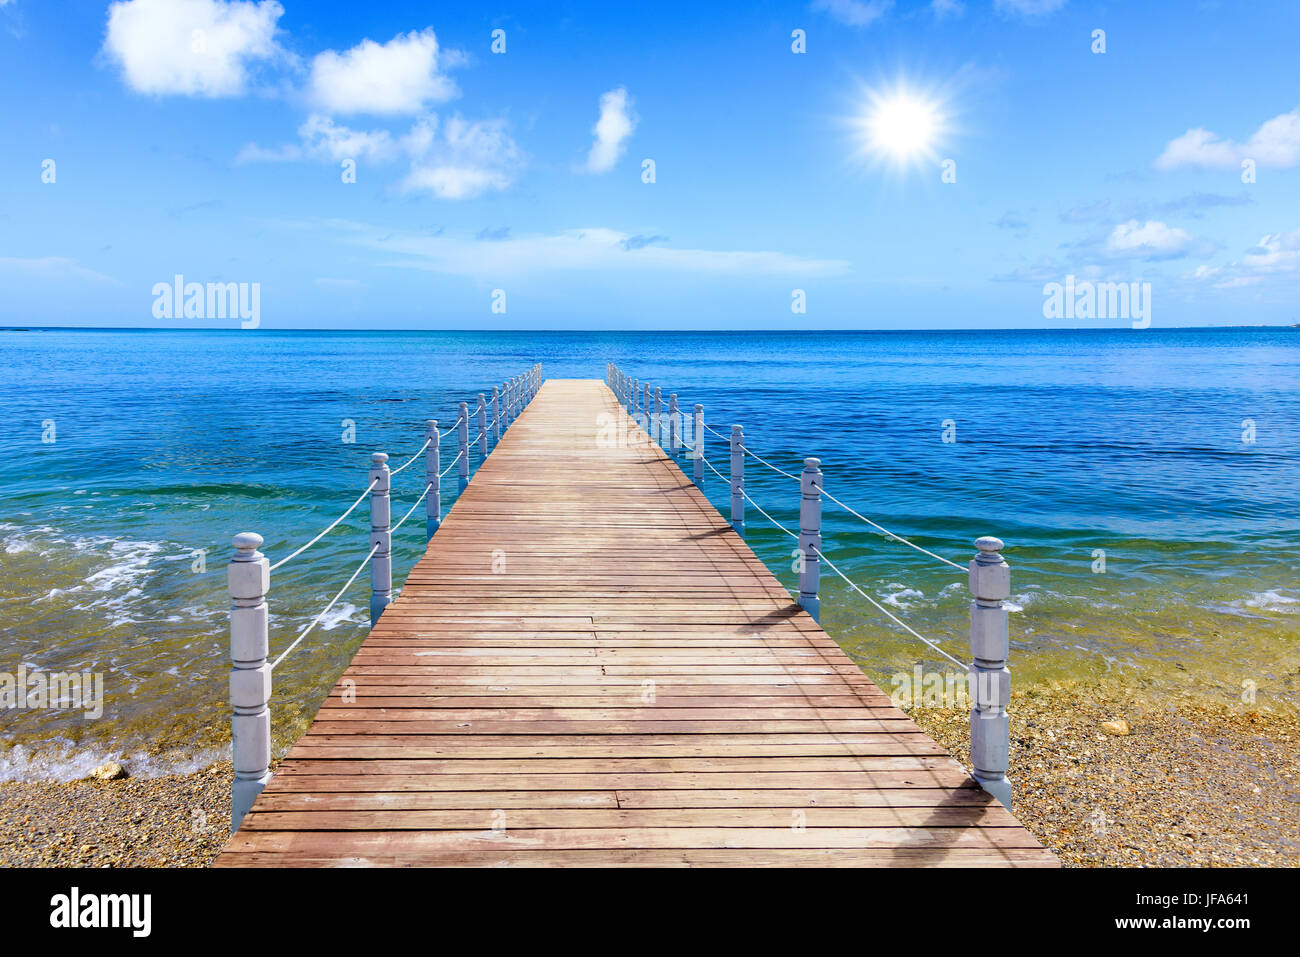 wooden bridge juts out into  of the sea Stock Photo